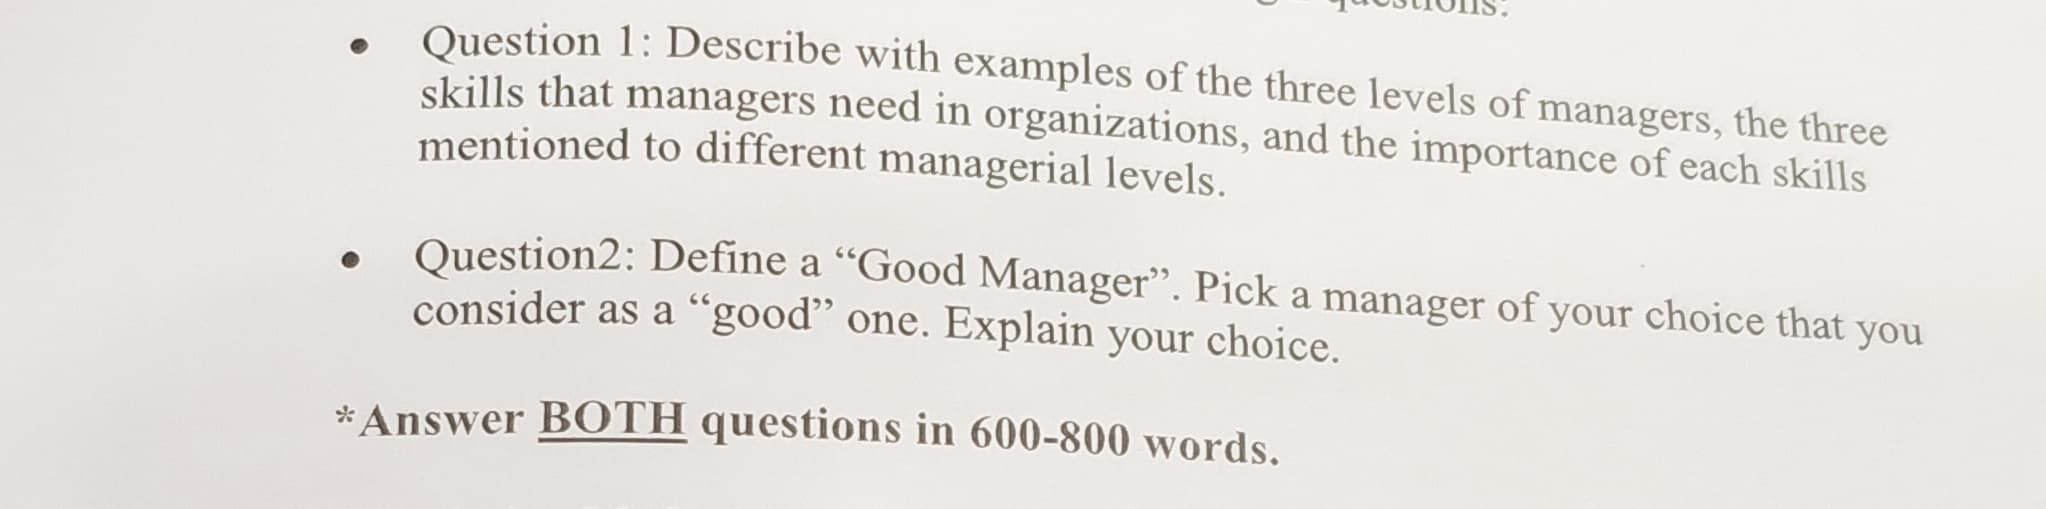 TOStIOIIS.
Question 1: Describe with examples of the three levels of managers, the three
skills that managers need in organizations, and the importance of each skills
mentioned to different managerial levels.
Ouestion2: Define a "Good Manager". Pick a manager of your choice that you
consider as a "good" one. Explain your choice.
Answer BOTH questions in 600-800 words.
